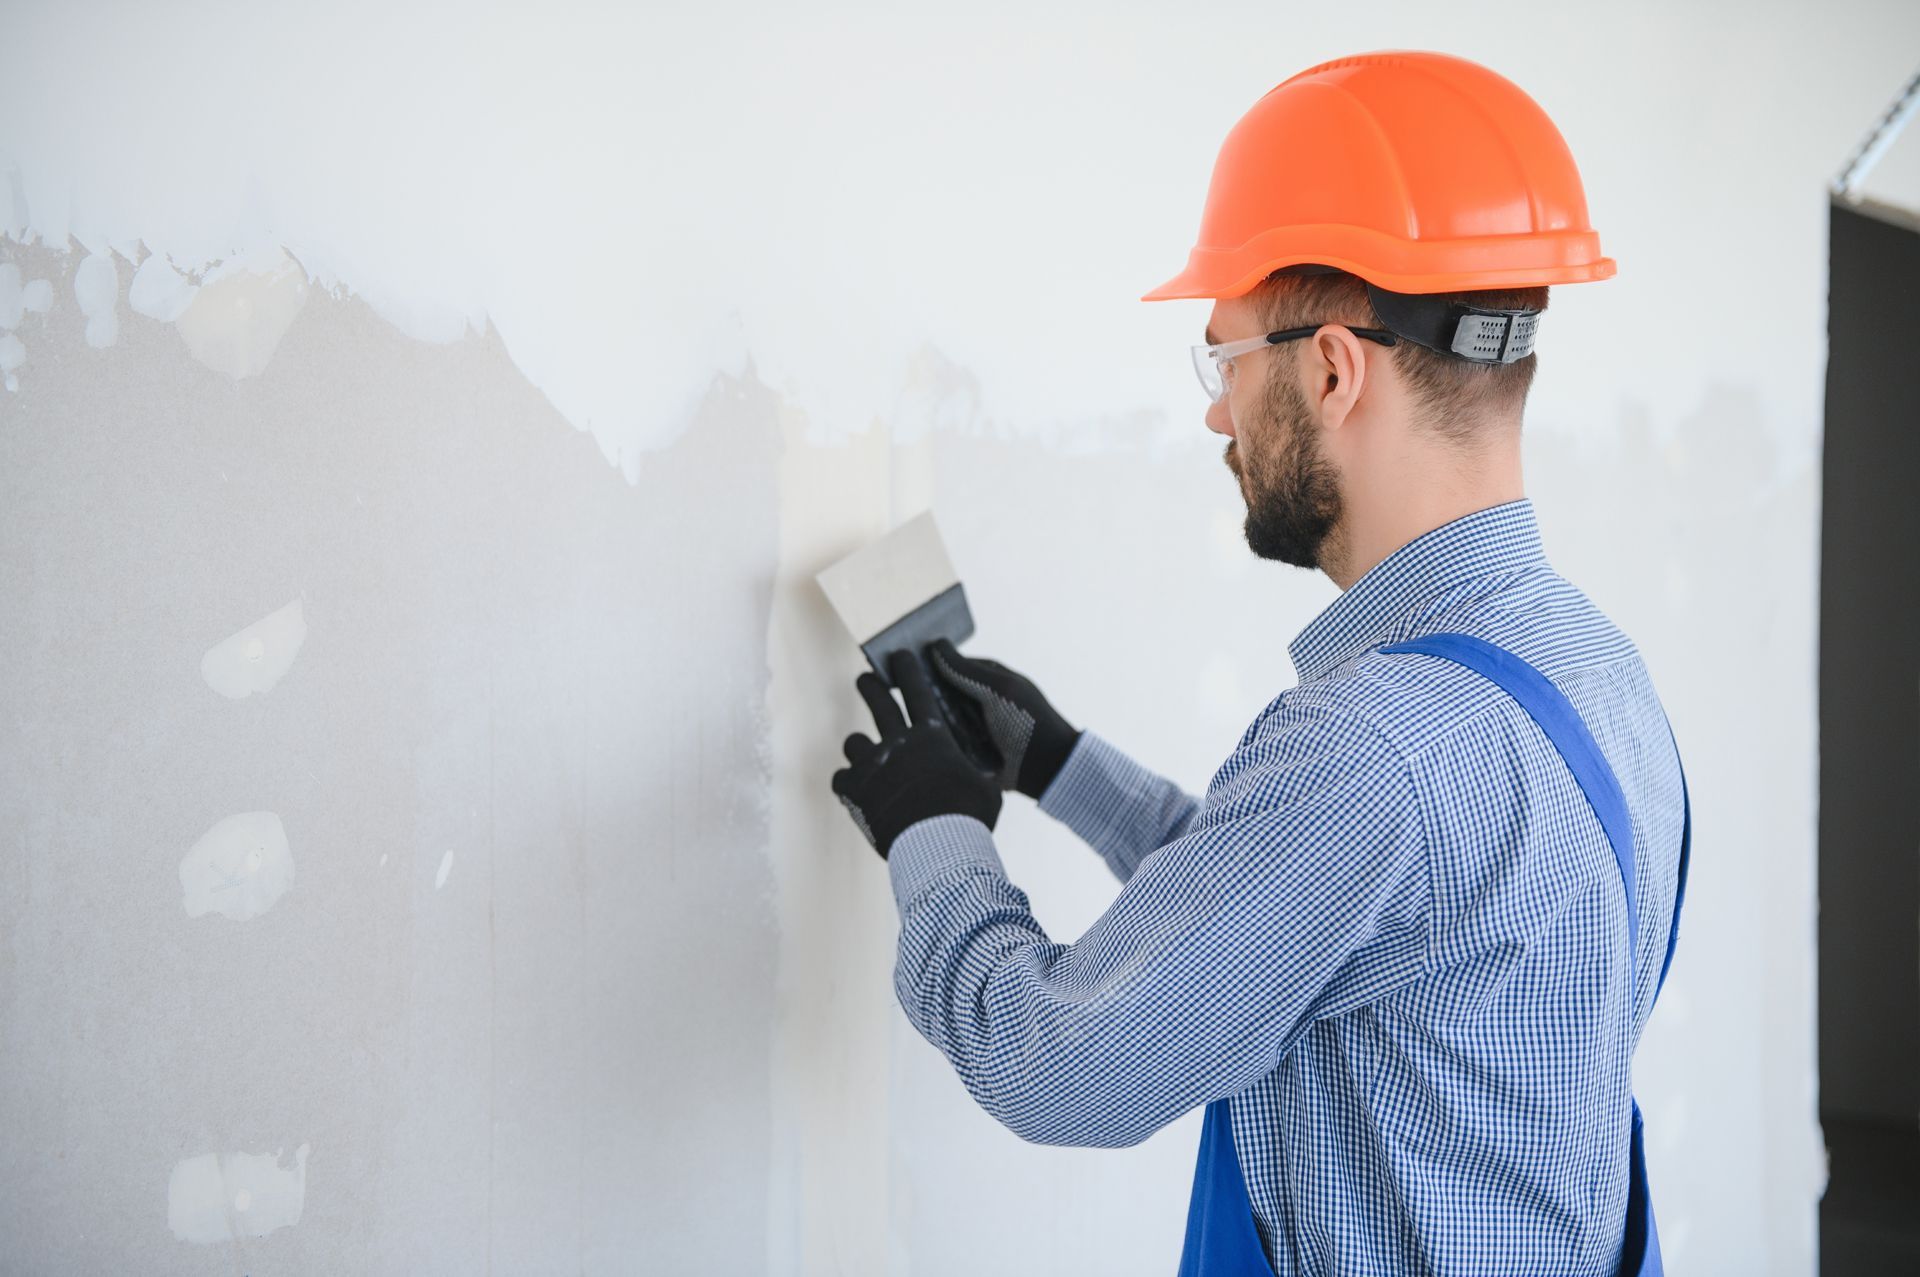 A Man is Plastering a Wall With a Spatula